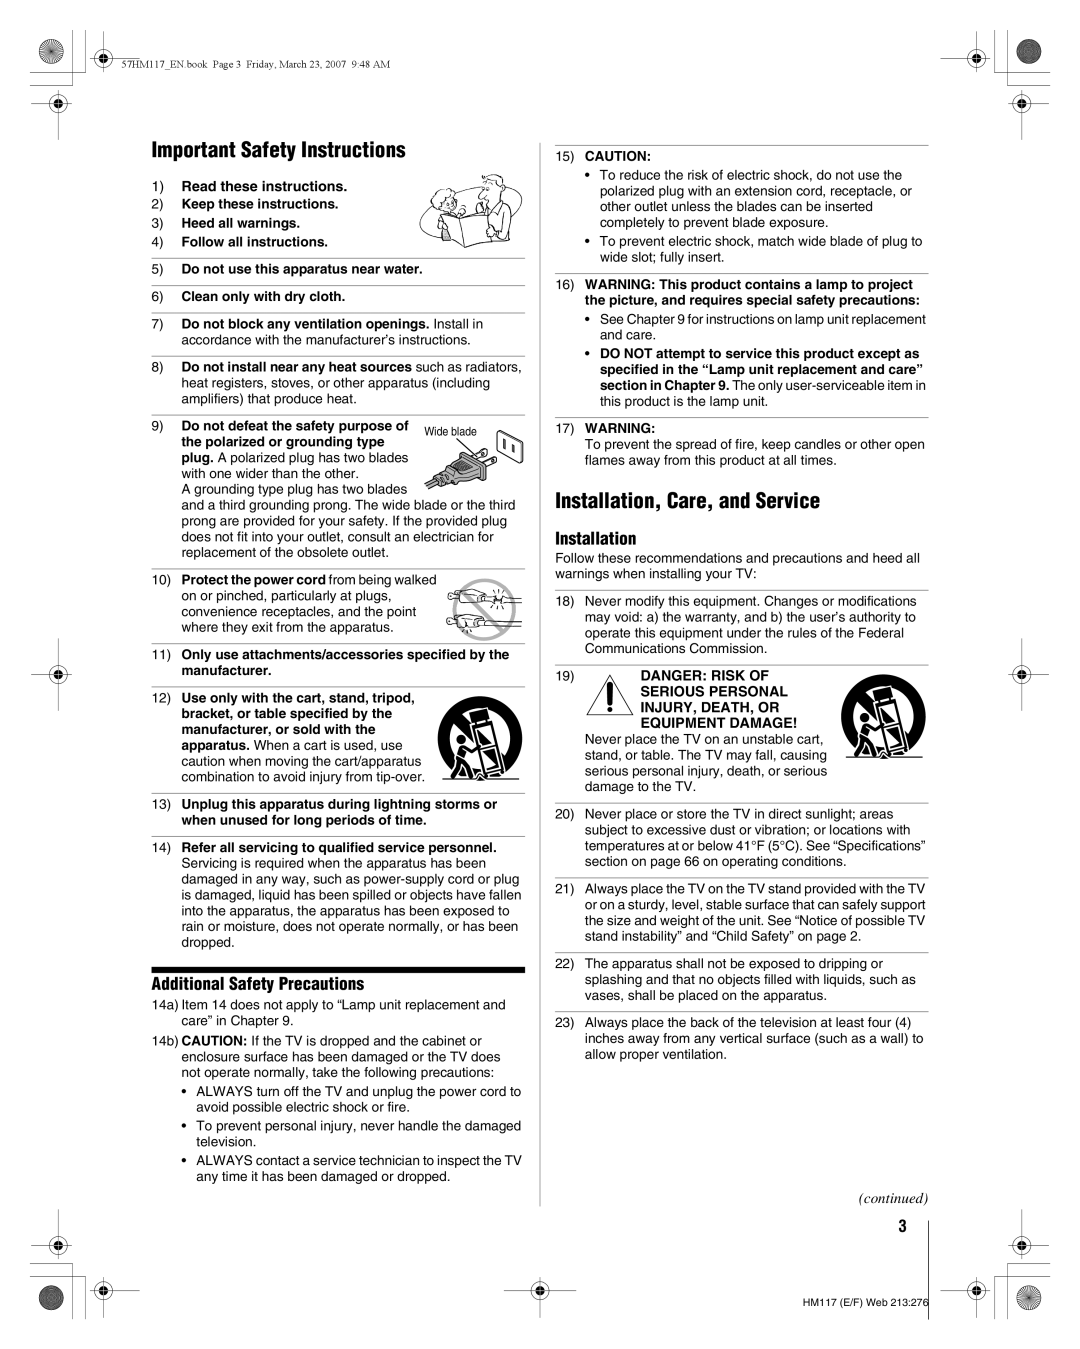 Toshiba 57HM117, 65HM117 Important Safety Instructions, Installation, Care, and Service, Additional Safety Precautions 